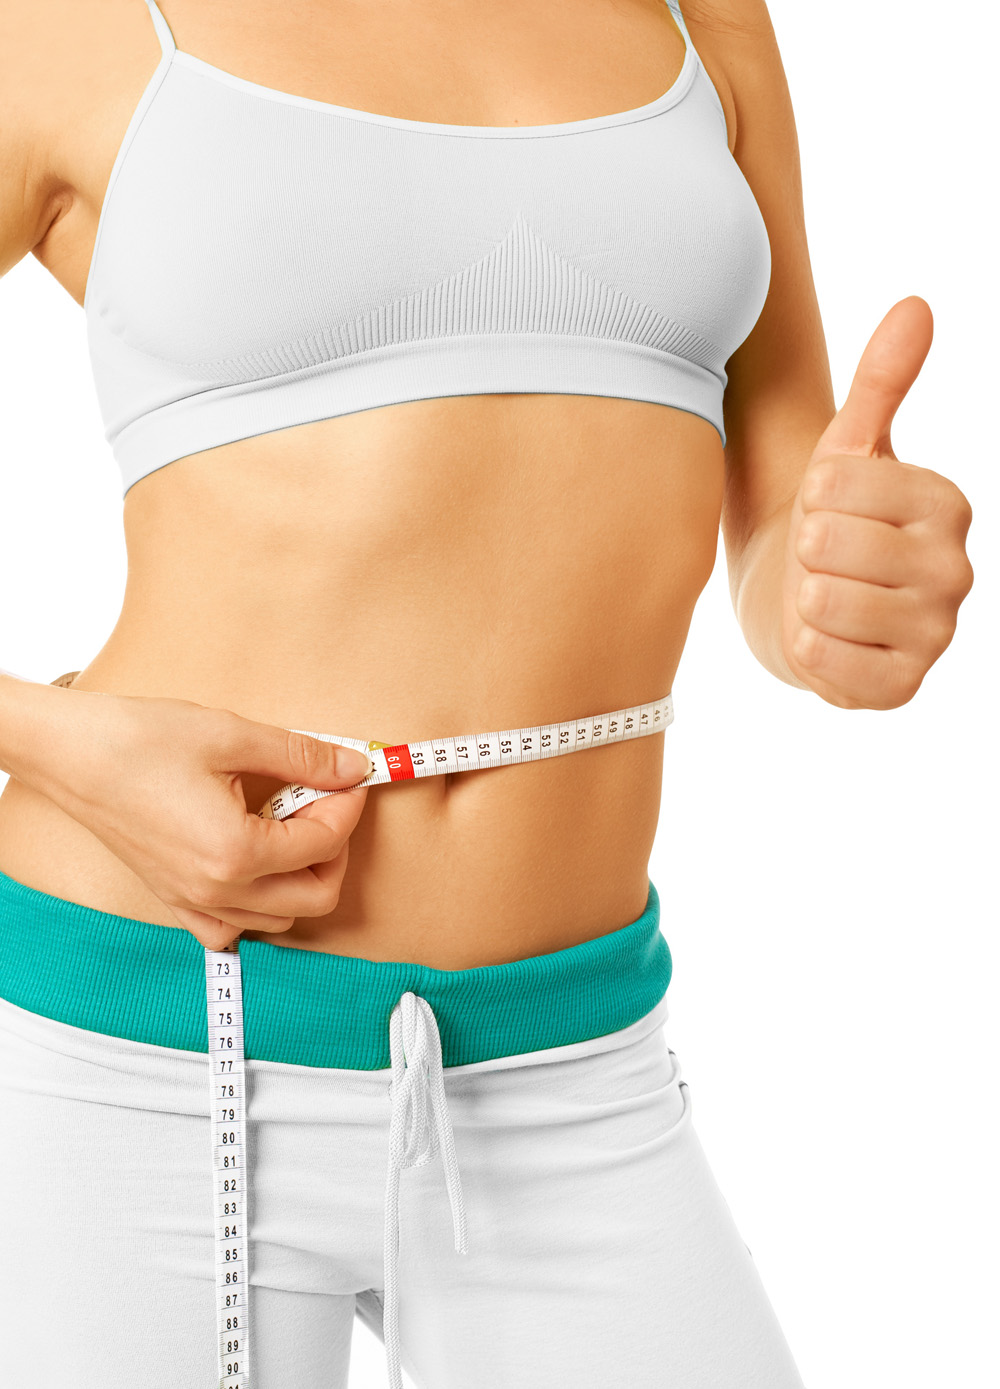 An Insight Into The Non Surgical Liposuction Procedure